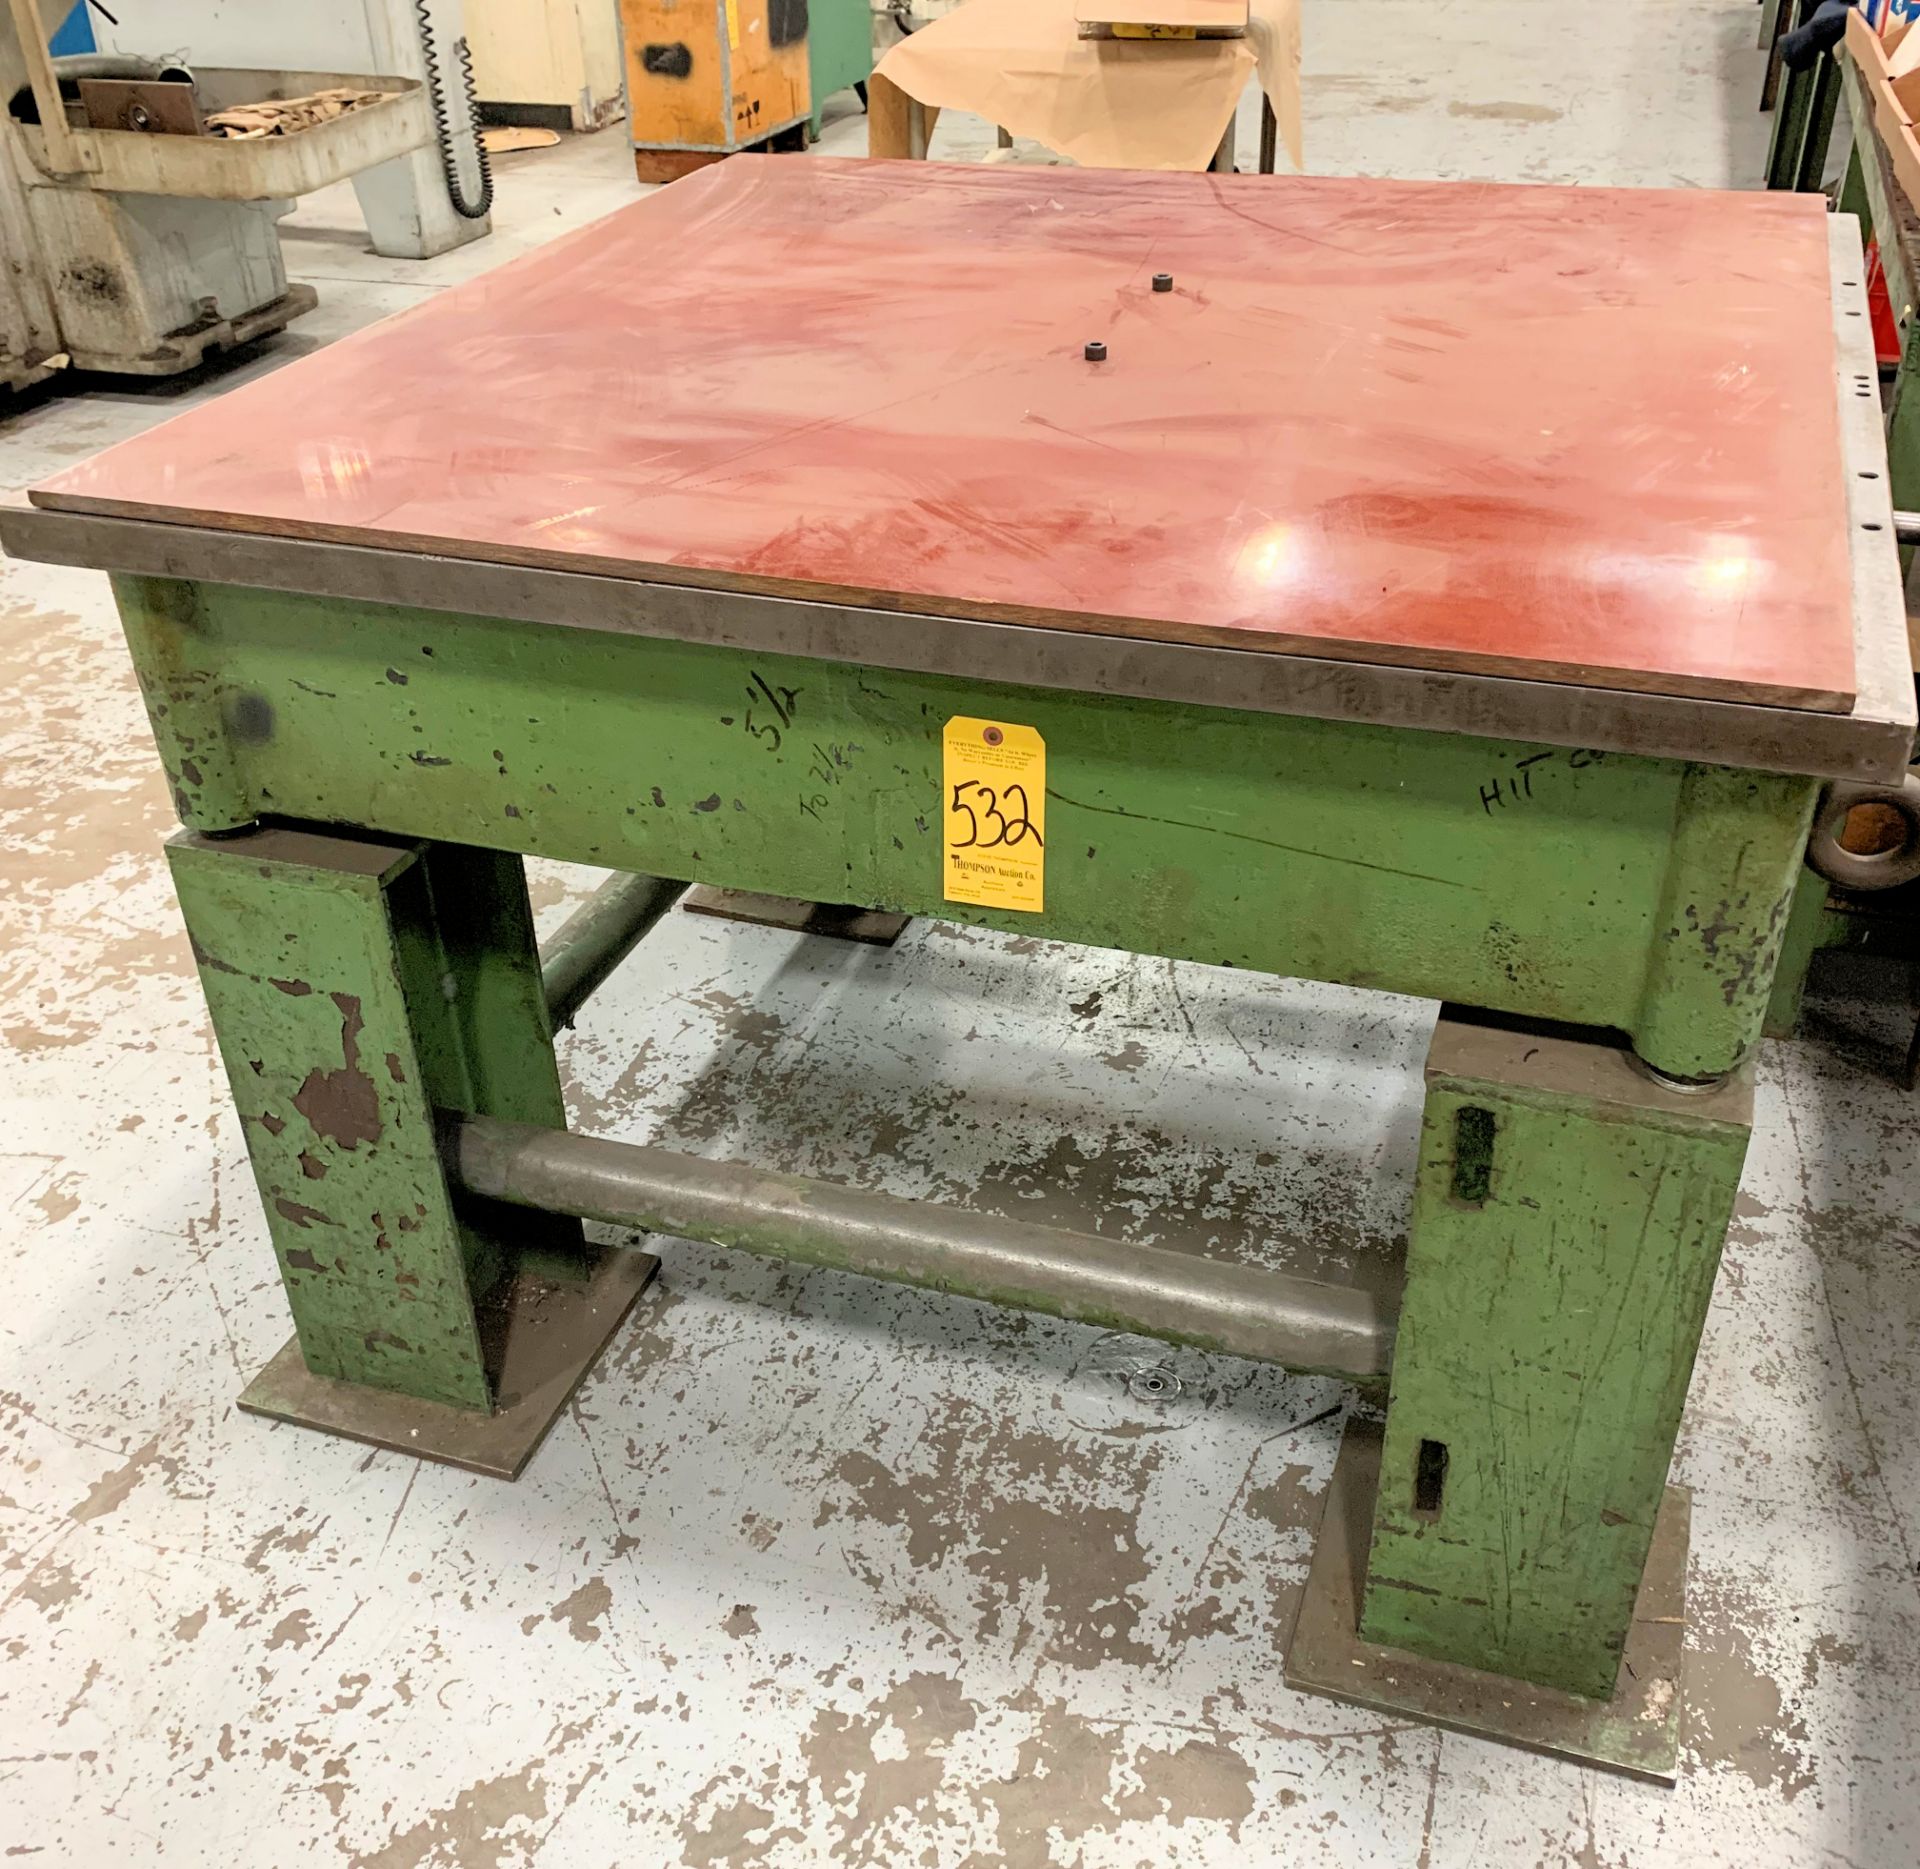 48" x 51" Steel Layout Table on Steel Stand